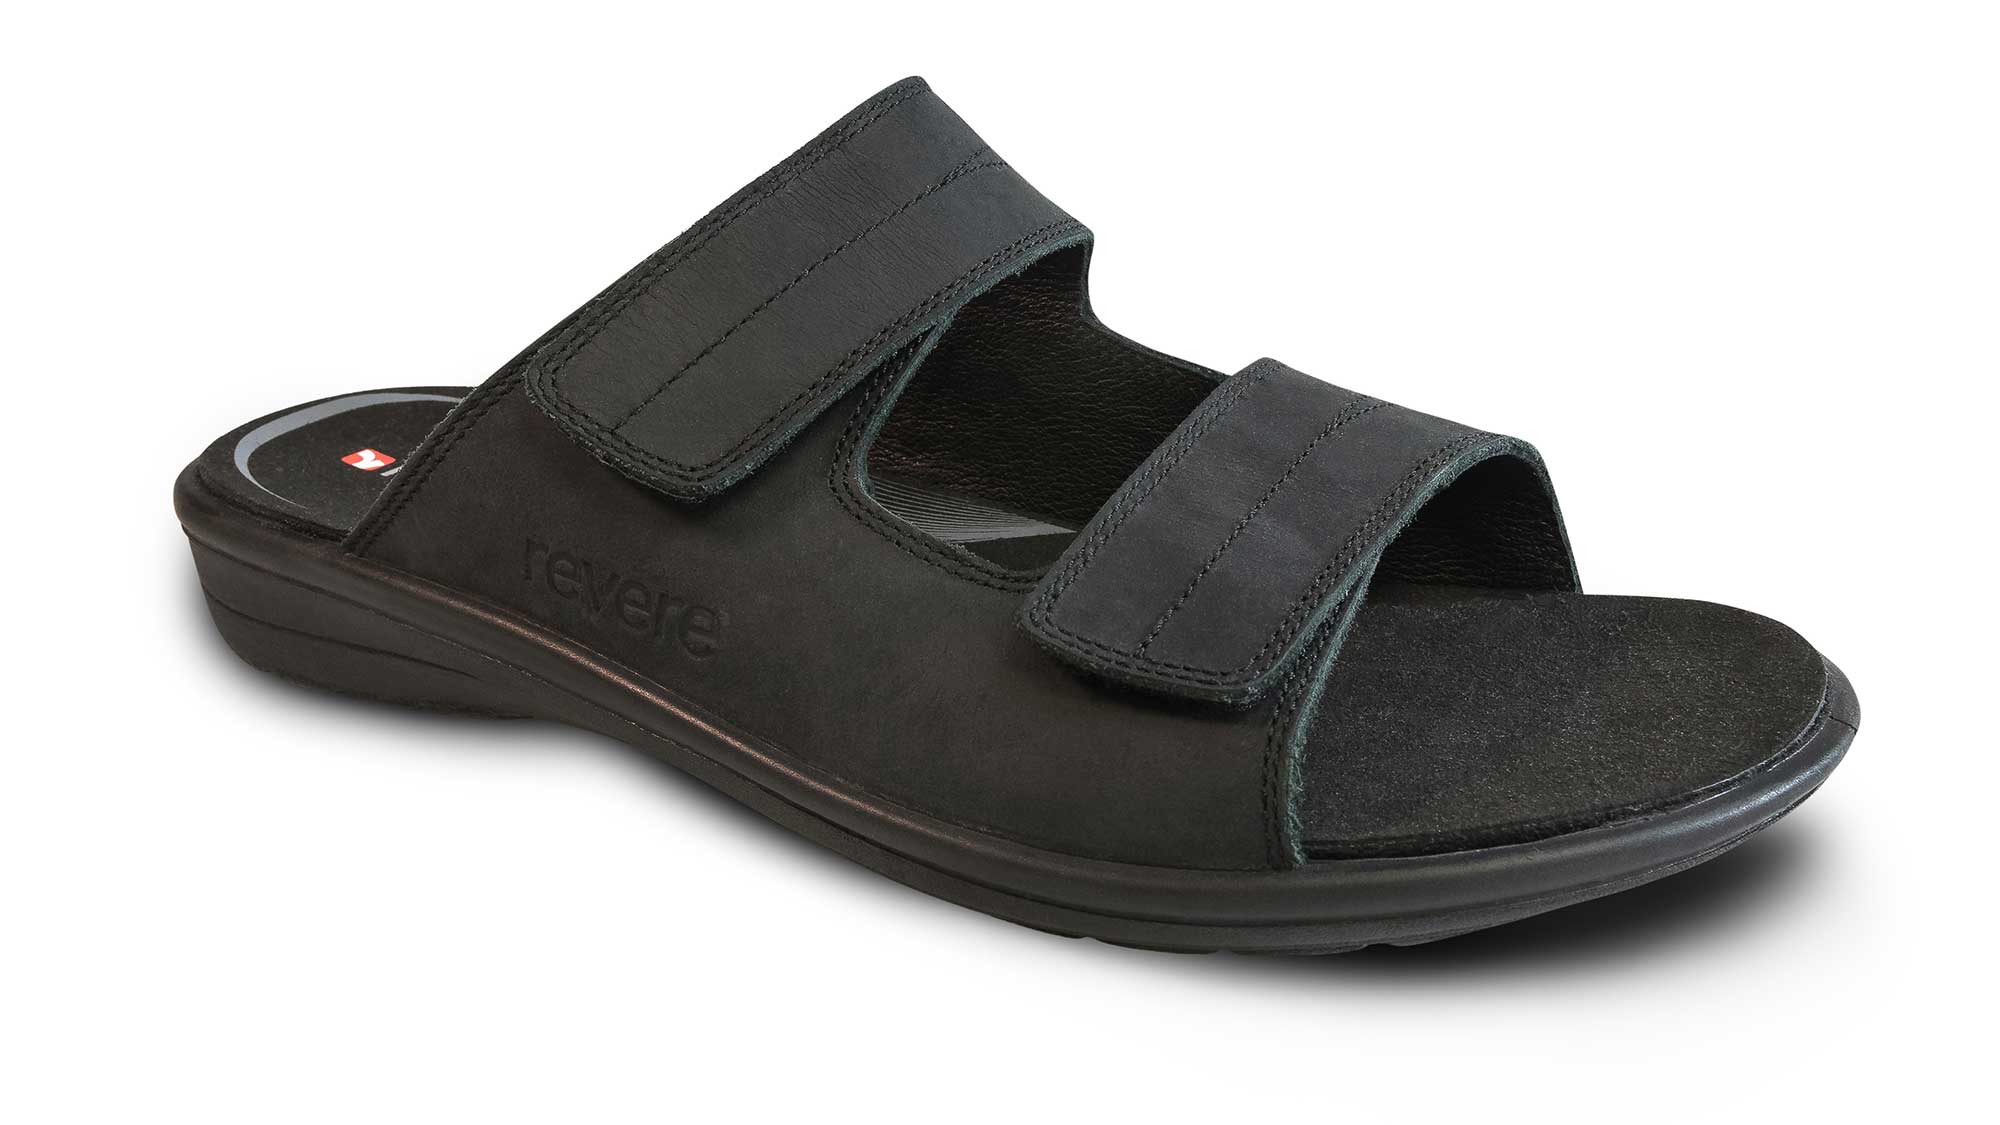 Revere Durban  - Men's Sandal - Medium - Extra Depth With Removable Foot Beds